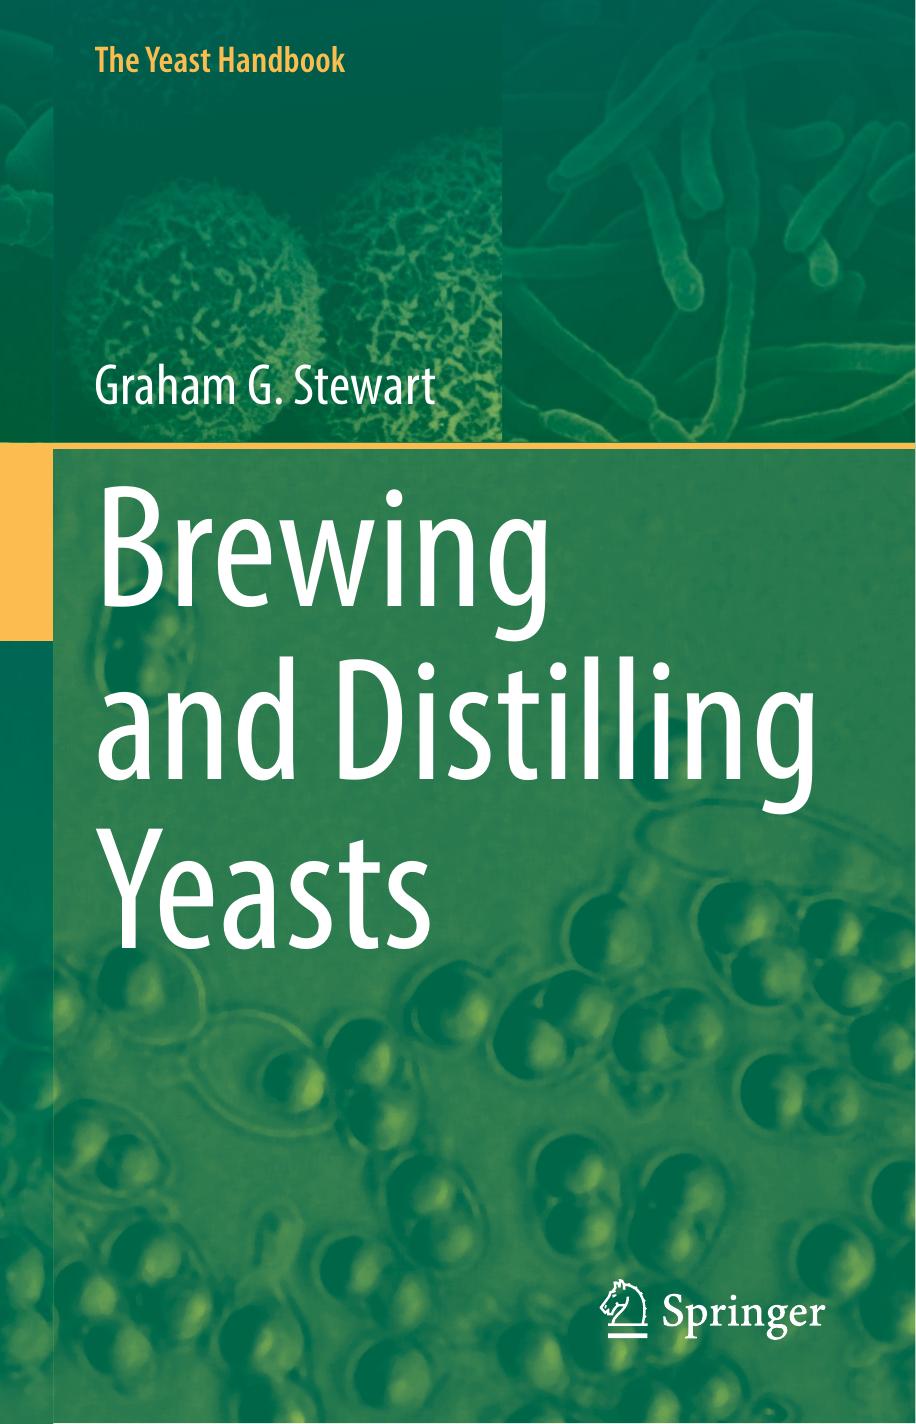 Brewing and Distilling Yeasts 2017